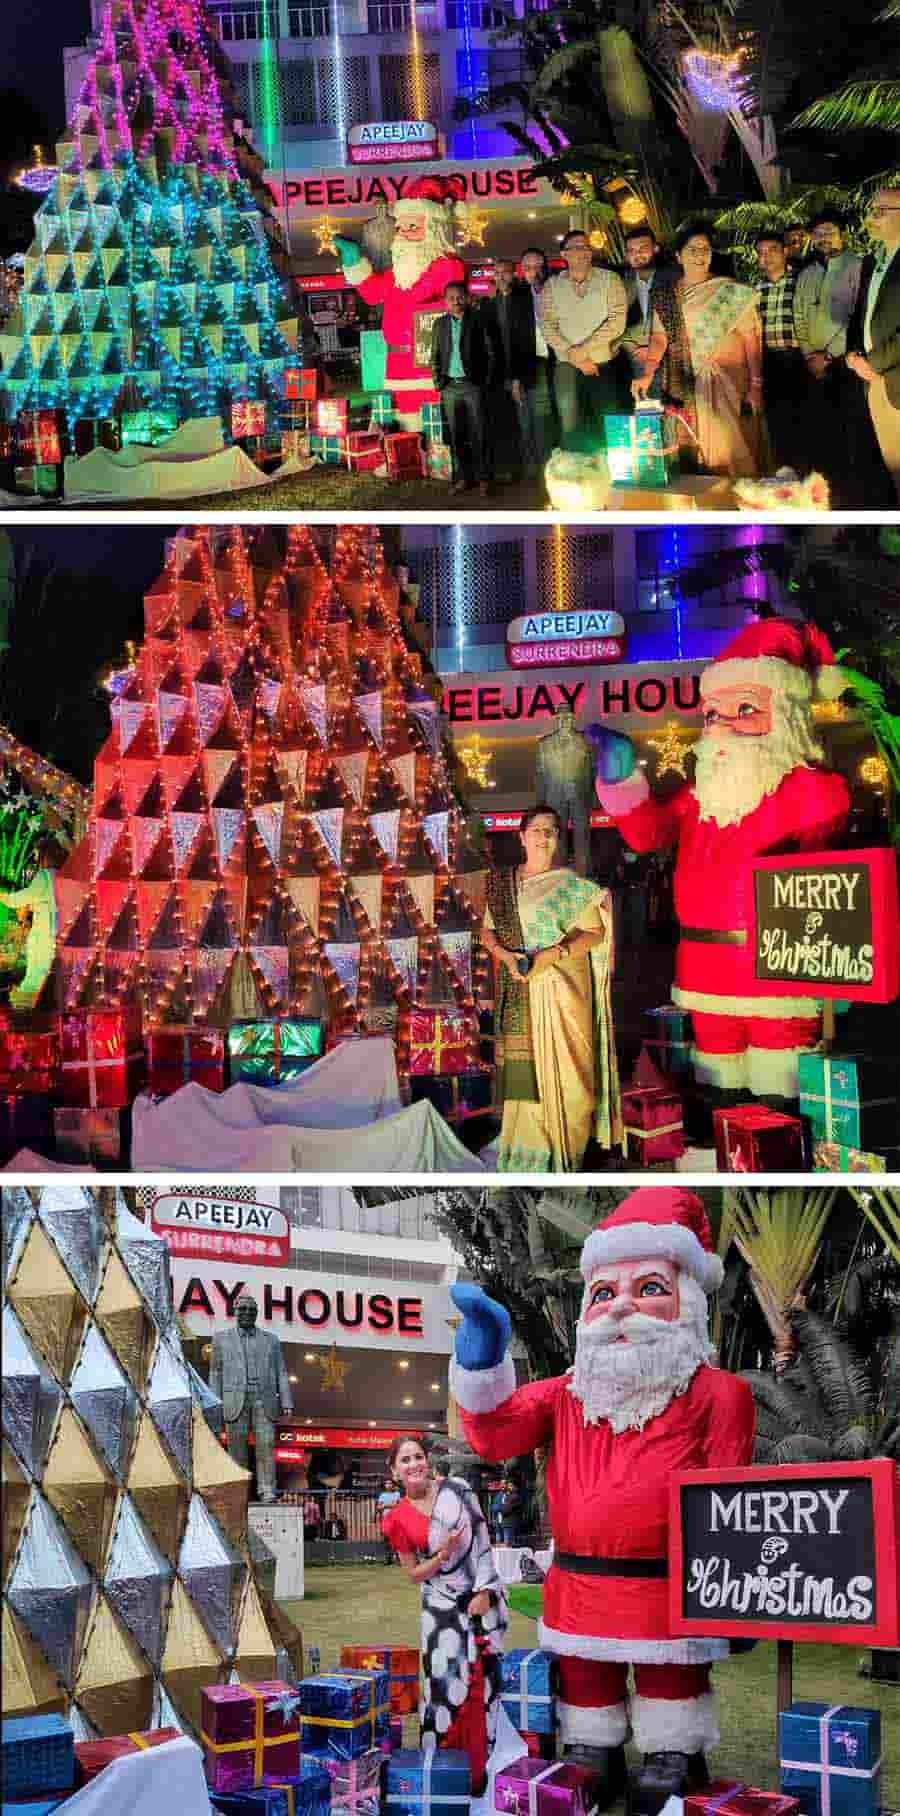 A 30-feet Christmas tree was inaugurated at the Apeejay House lawn at Park Street on Friday. Sashi Panja, minister-in-charge of Industry, Commerce and Enterprise, Public Enterprises and Industrial Reconstruction, and Women & Child Development and Social Welfare inaugurated the exhibit. Tollywood actor Trina Saha was also present at the event. The installations at the venue will remain open for public viewing from outside the Apeejay House premises from December 23, 2022 to January 3, 2023